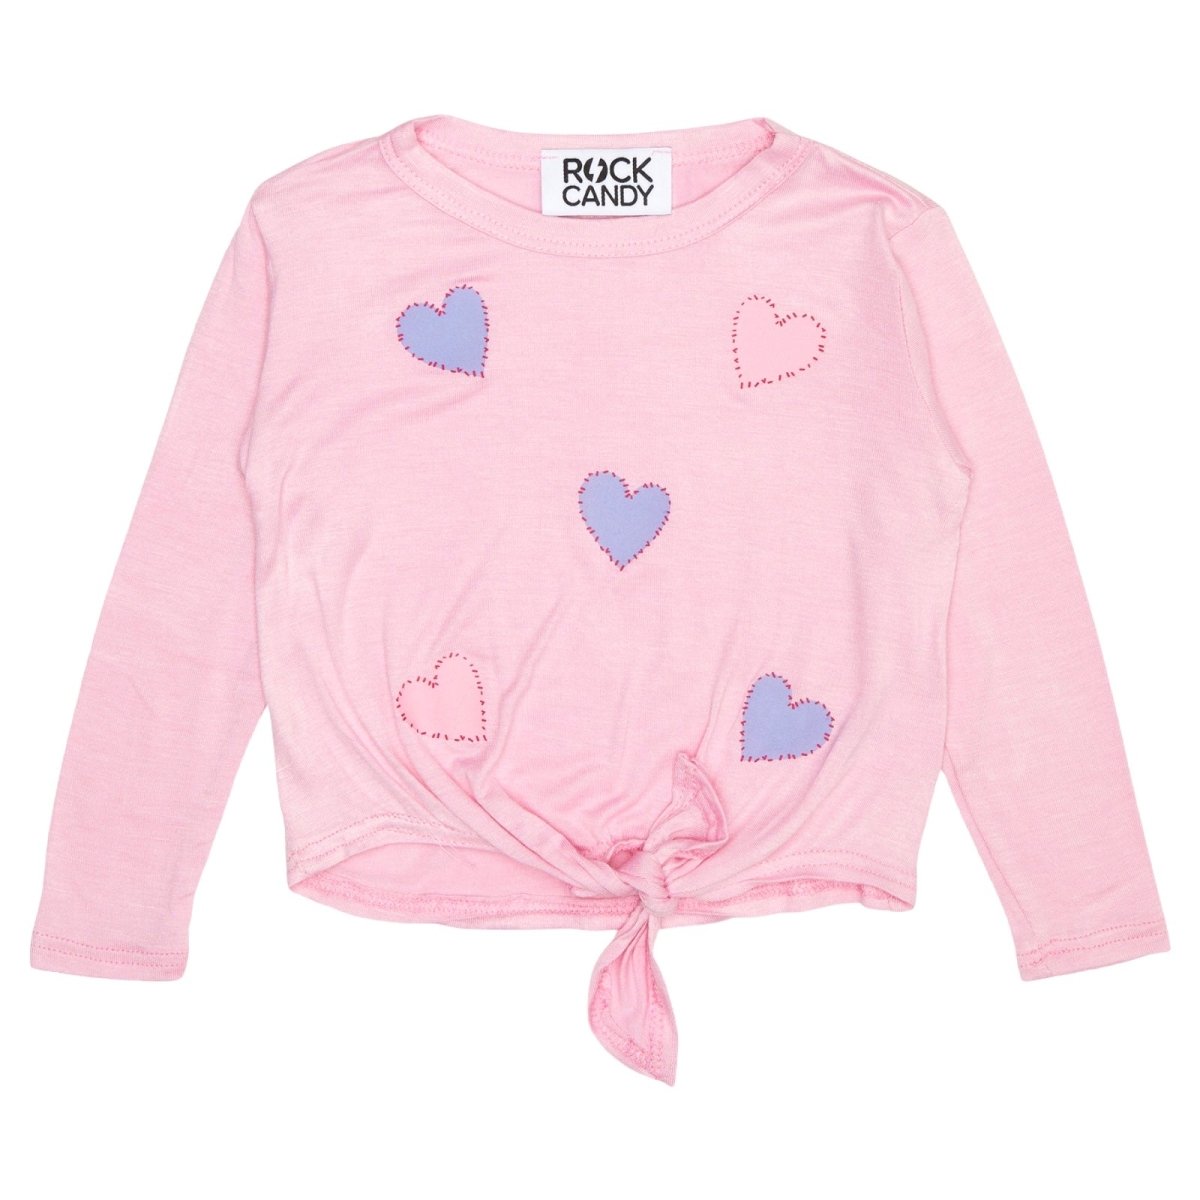 HEART STITCHED LONG SLEEVE TSHIRT WITH TIES - ROCK CANDY